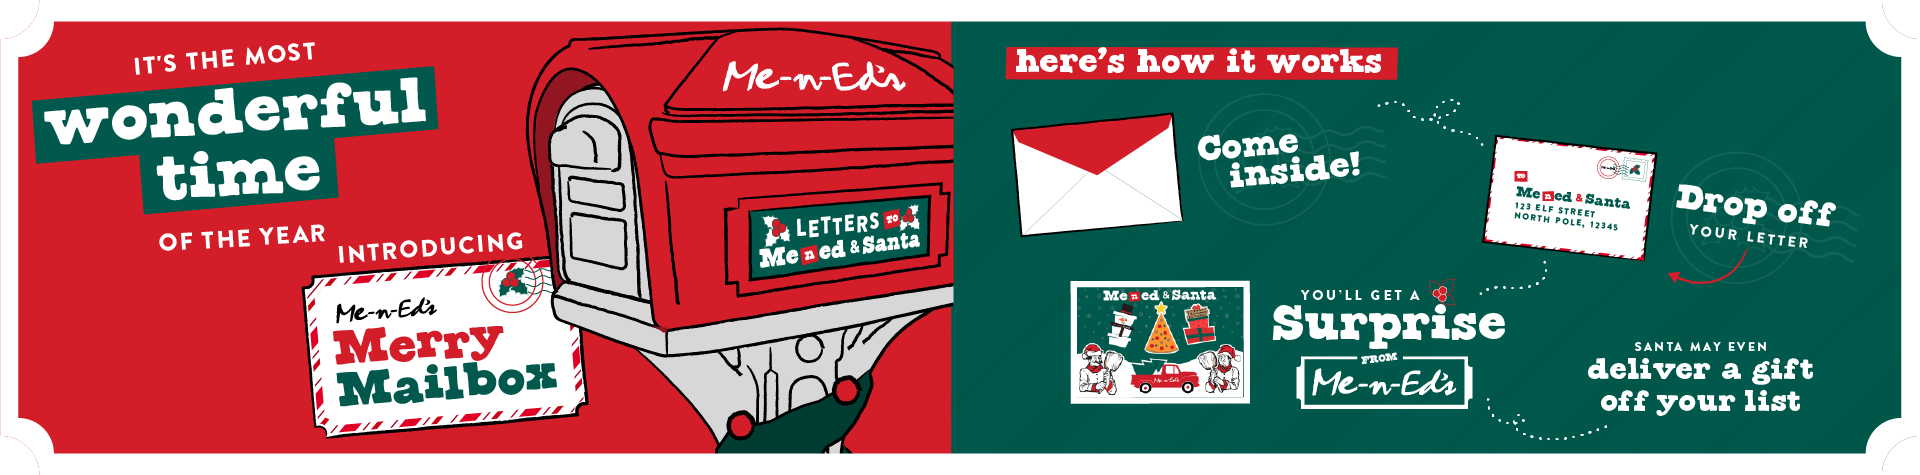 It's the most wonderful time of the year! Introducing Me-N-Ed's Marry Mailbox. Here's how it works: Come inside, drop off your letter, you'll get a surprise from Me-N-Ed's, and Santa may even deliver a gift off your list.